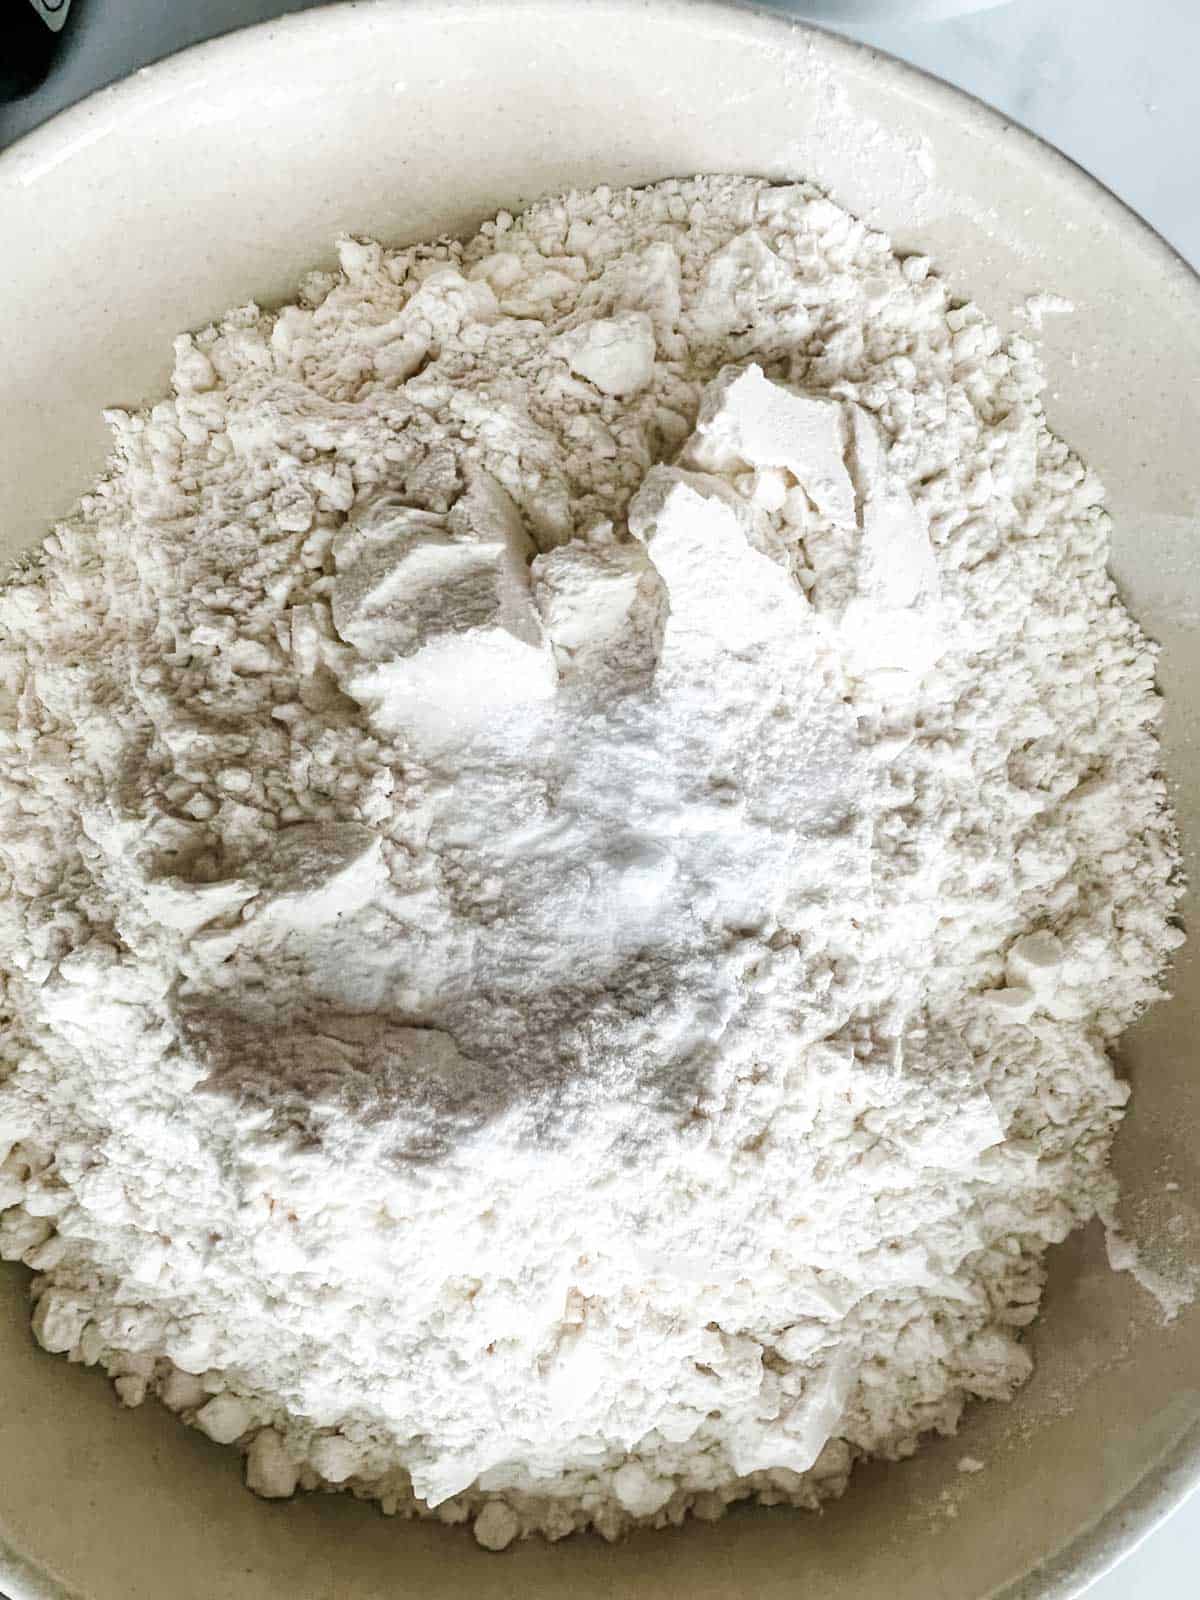 Photo of flour, salt, and baking powder in a bowl.